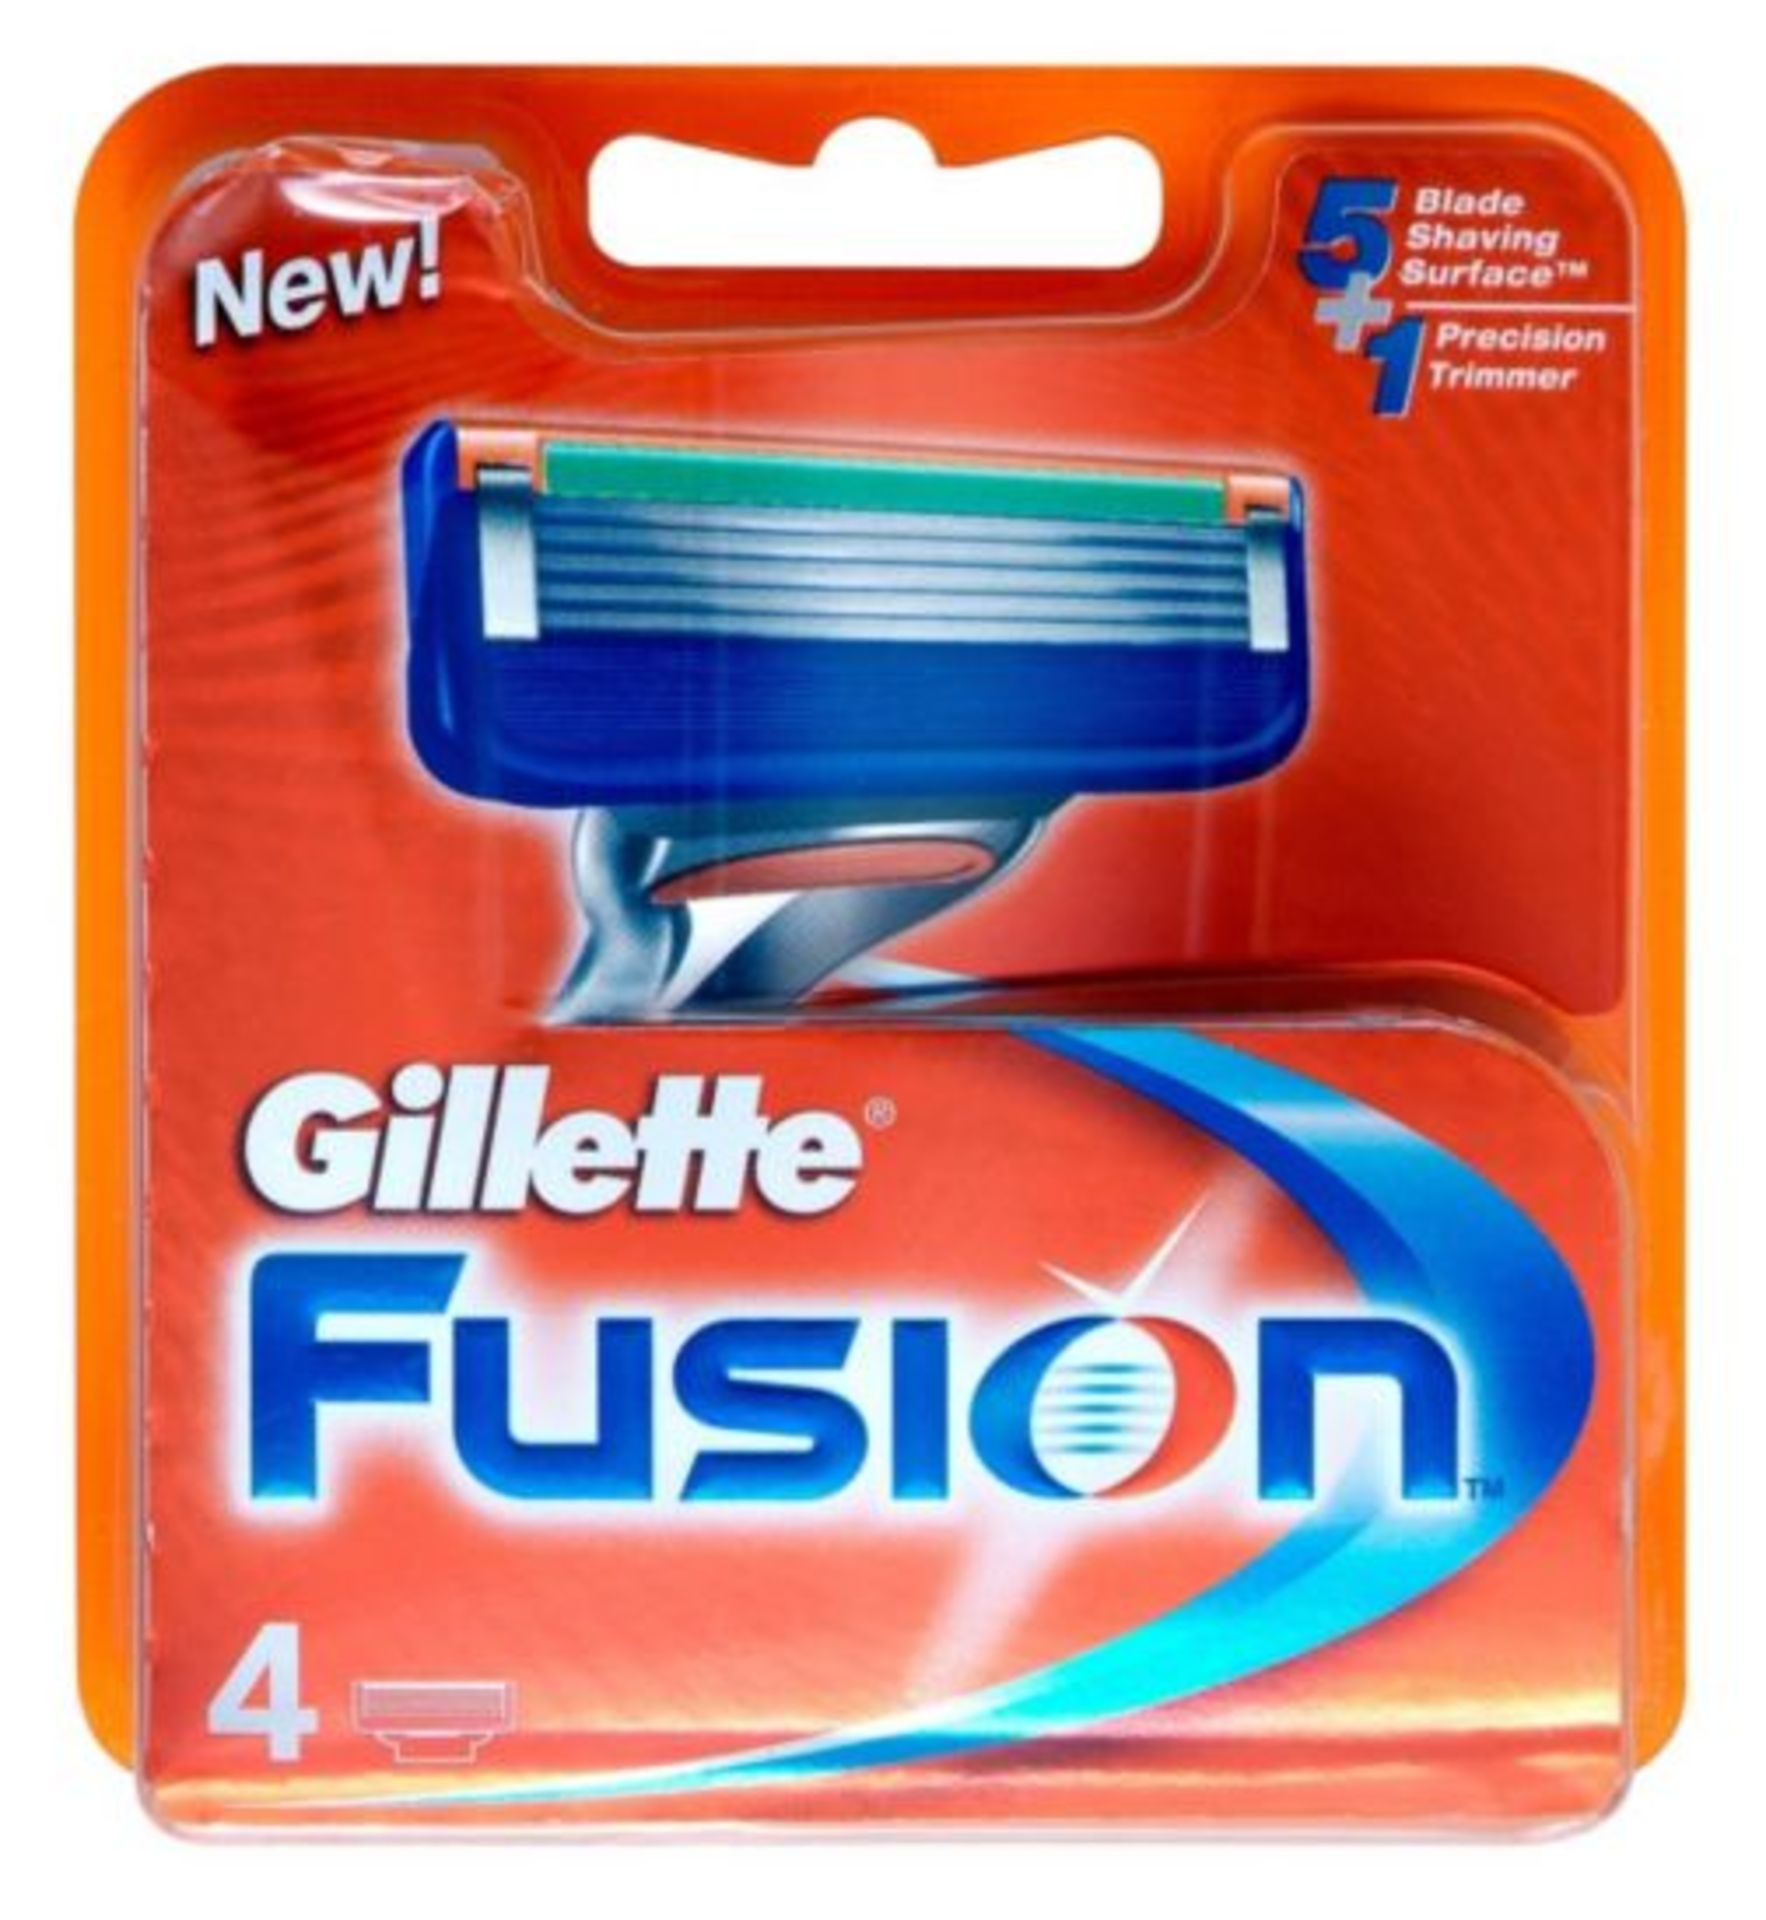 V Brand New Gillette Fusion Razor Blades 4 Pack RRP: £13.98 X 2 YOUR BID PRICE TO BE MULTIPLIED BY